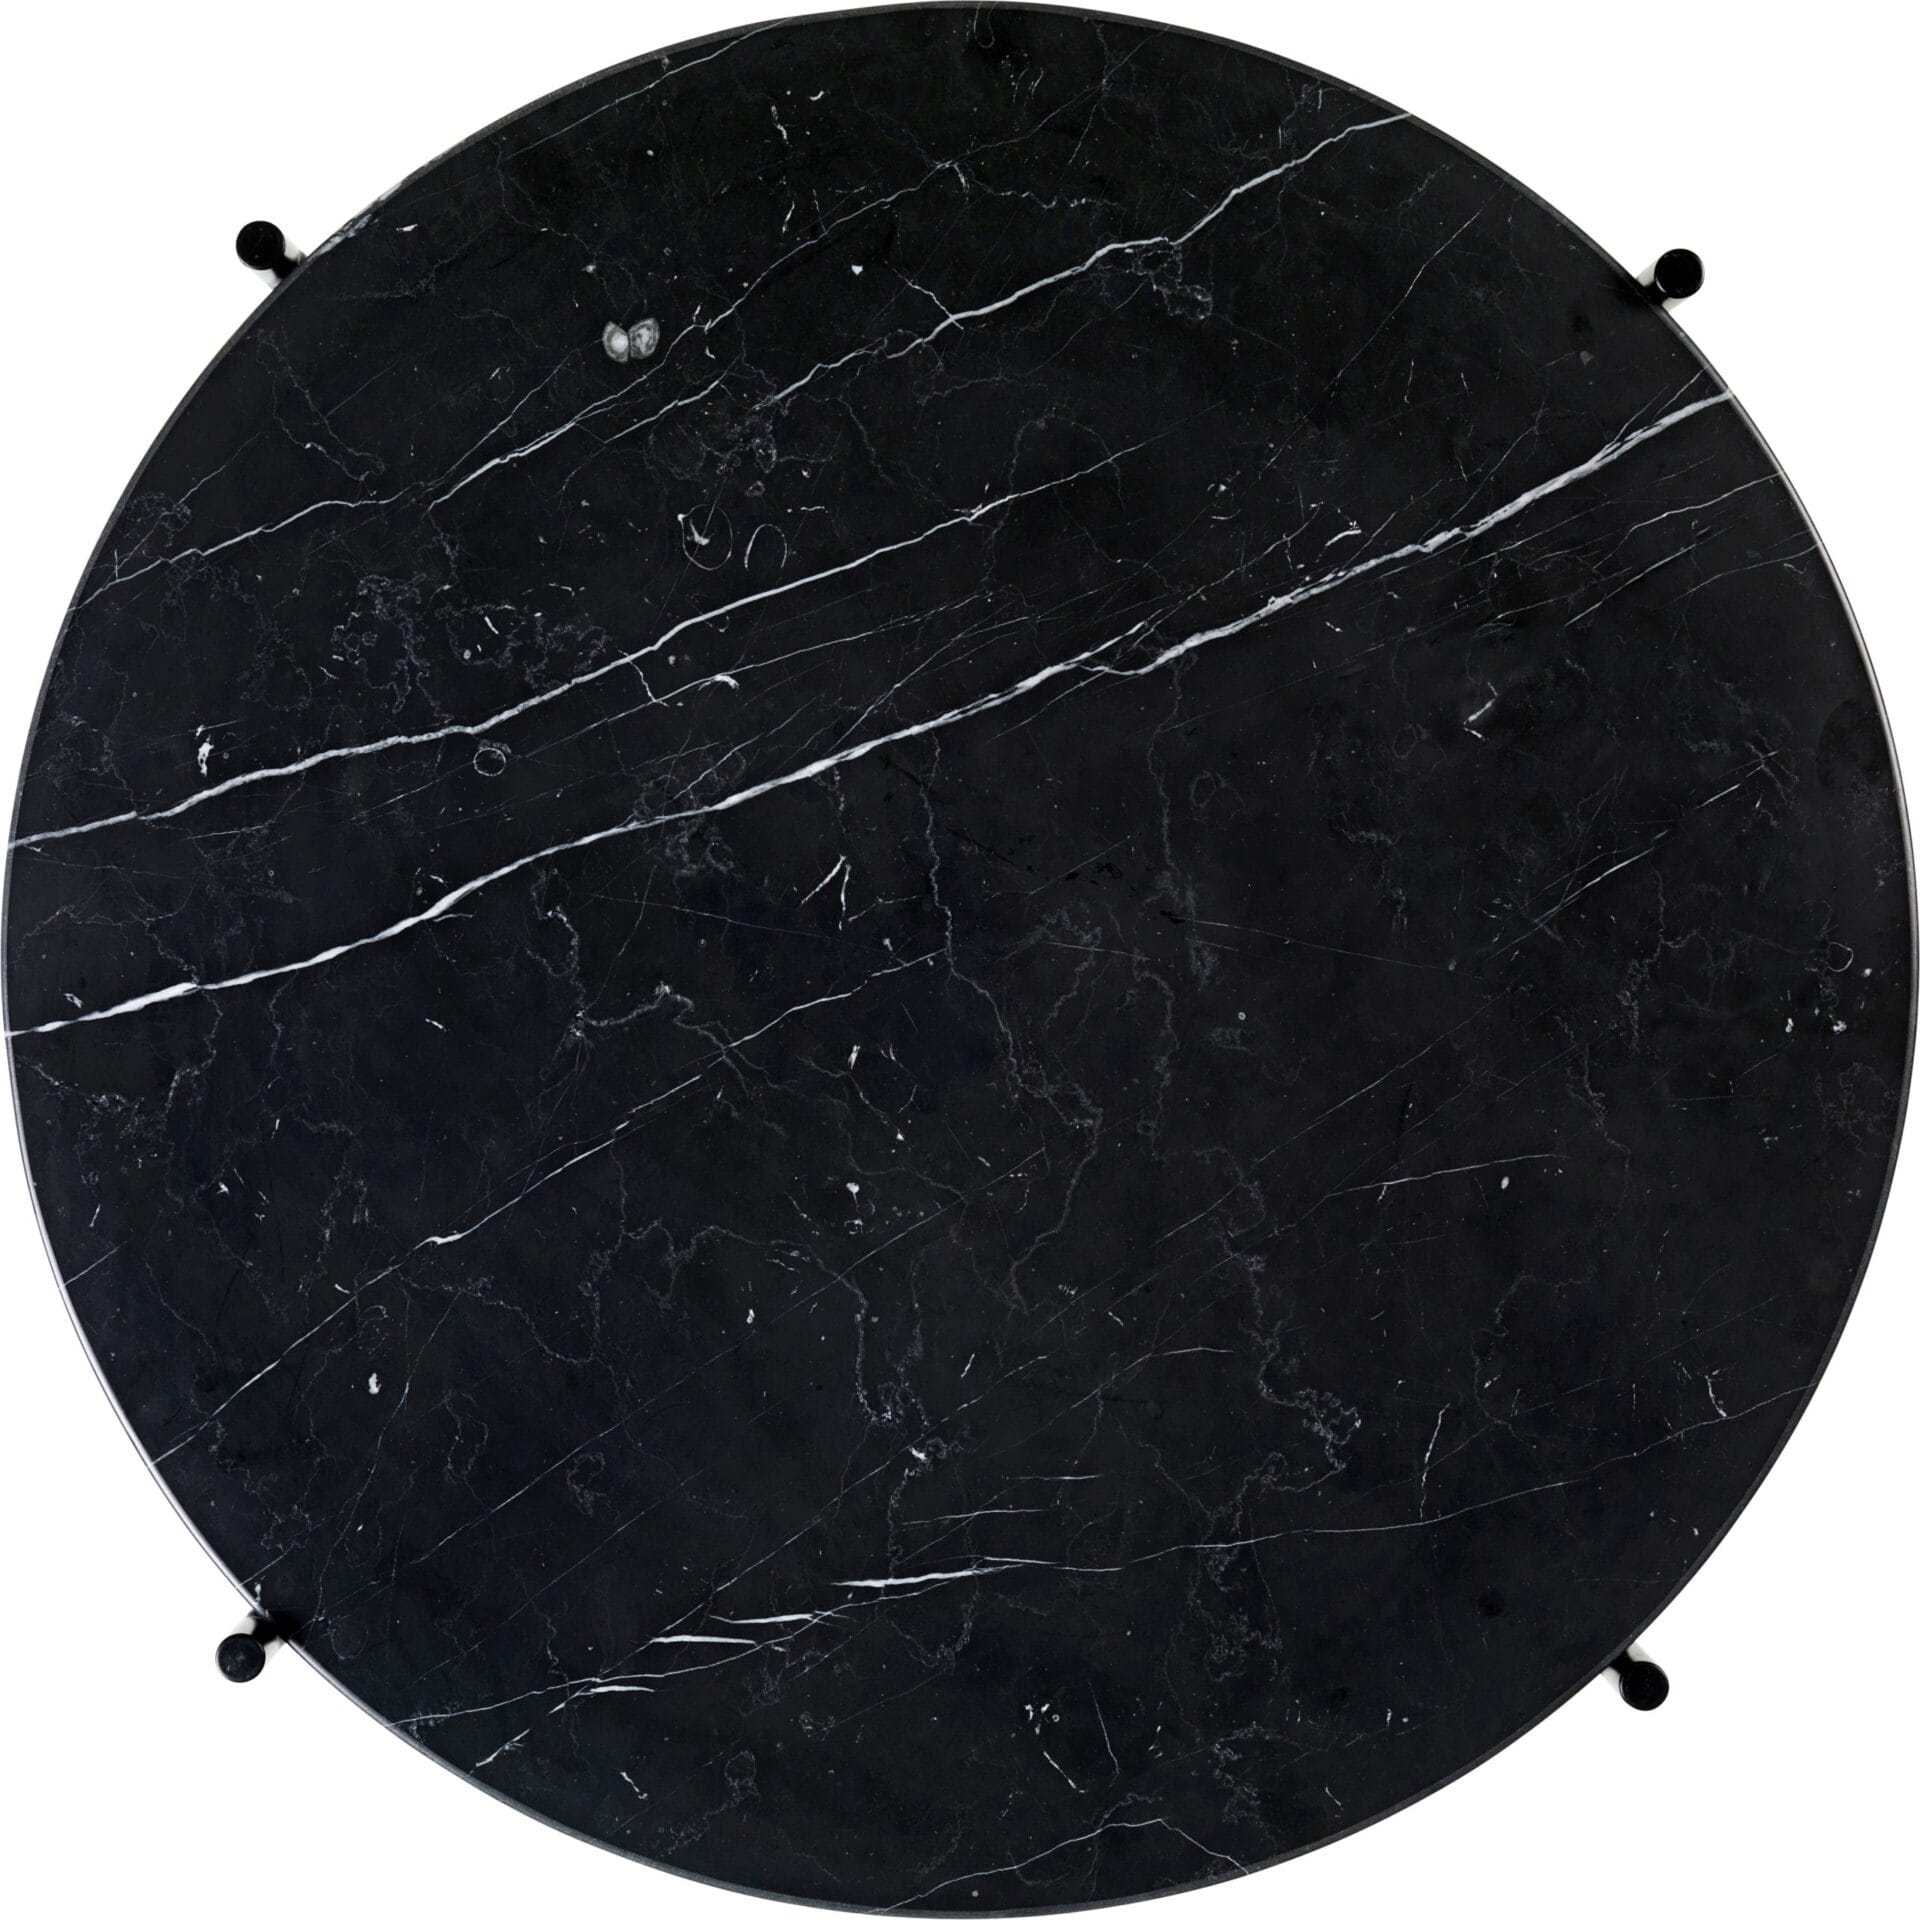 TS Coffee Table, Top: Black Marquina Marble, Base: Black, Round Ø55